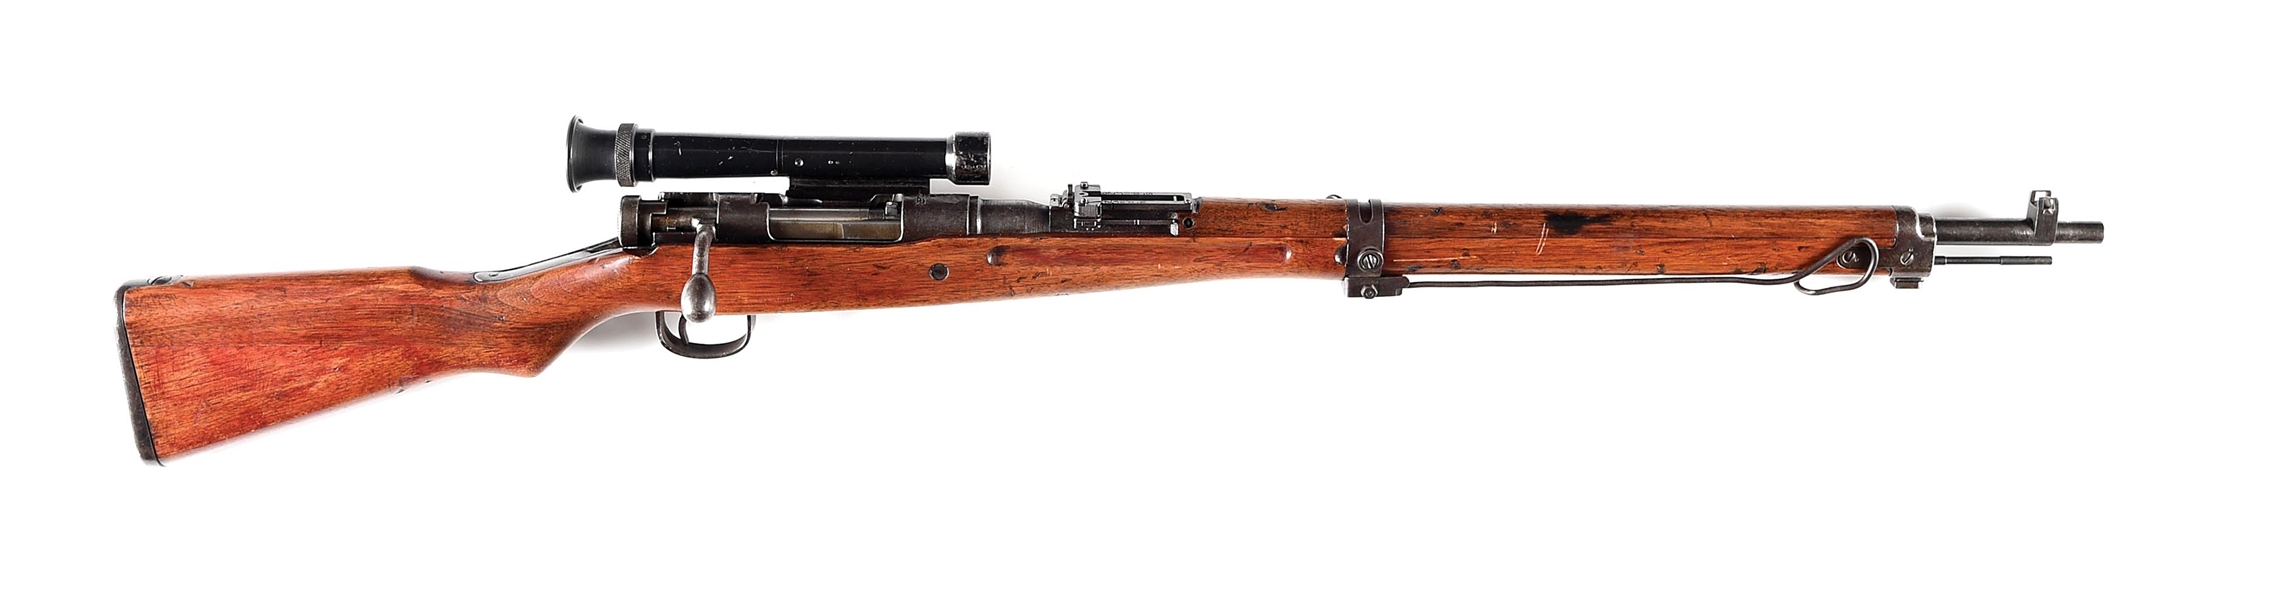 (C) SCARCE & HIGHLY DESIRABLE IMPERIAL JAPANESE NAGOYA ARSENAL TYPE 99 BOLT ACTION SNIPER RIFLE WITH 4X SCOPE.